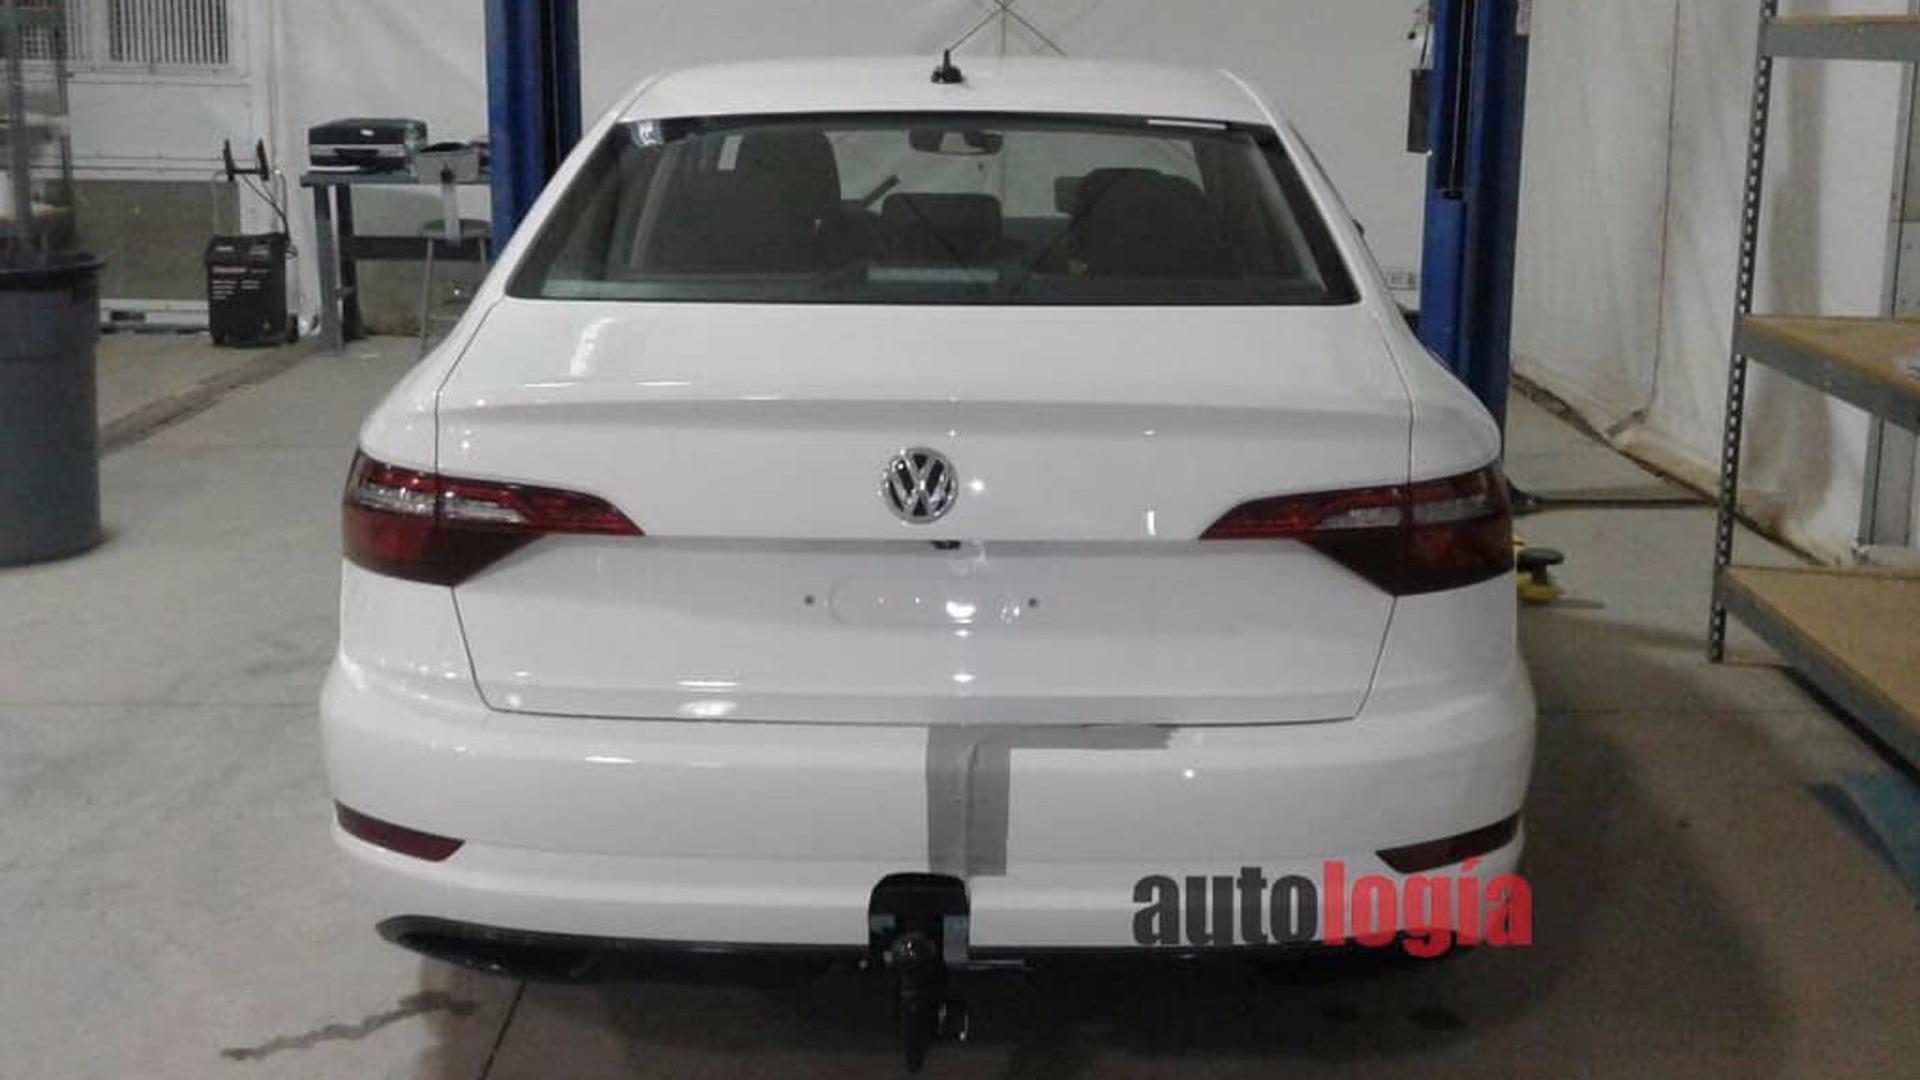 2018-volkswagen-jetta-snapped-without-camo-moves-to-mqb-platform_2.jpg